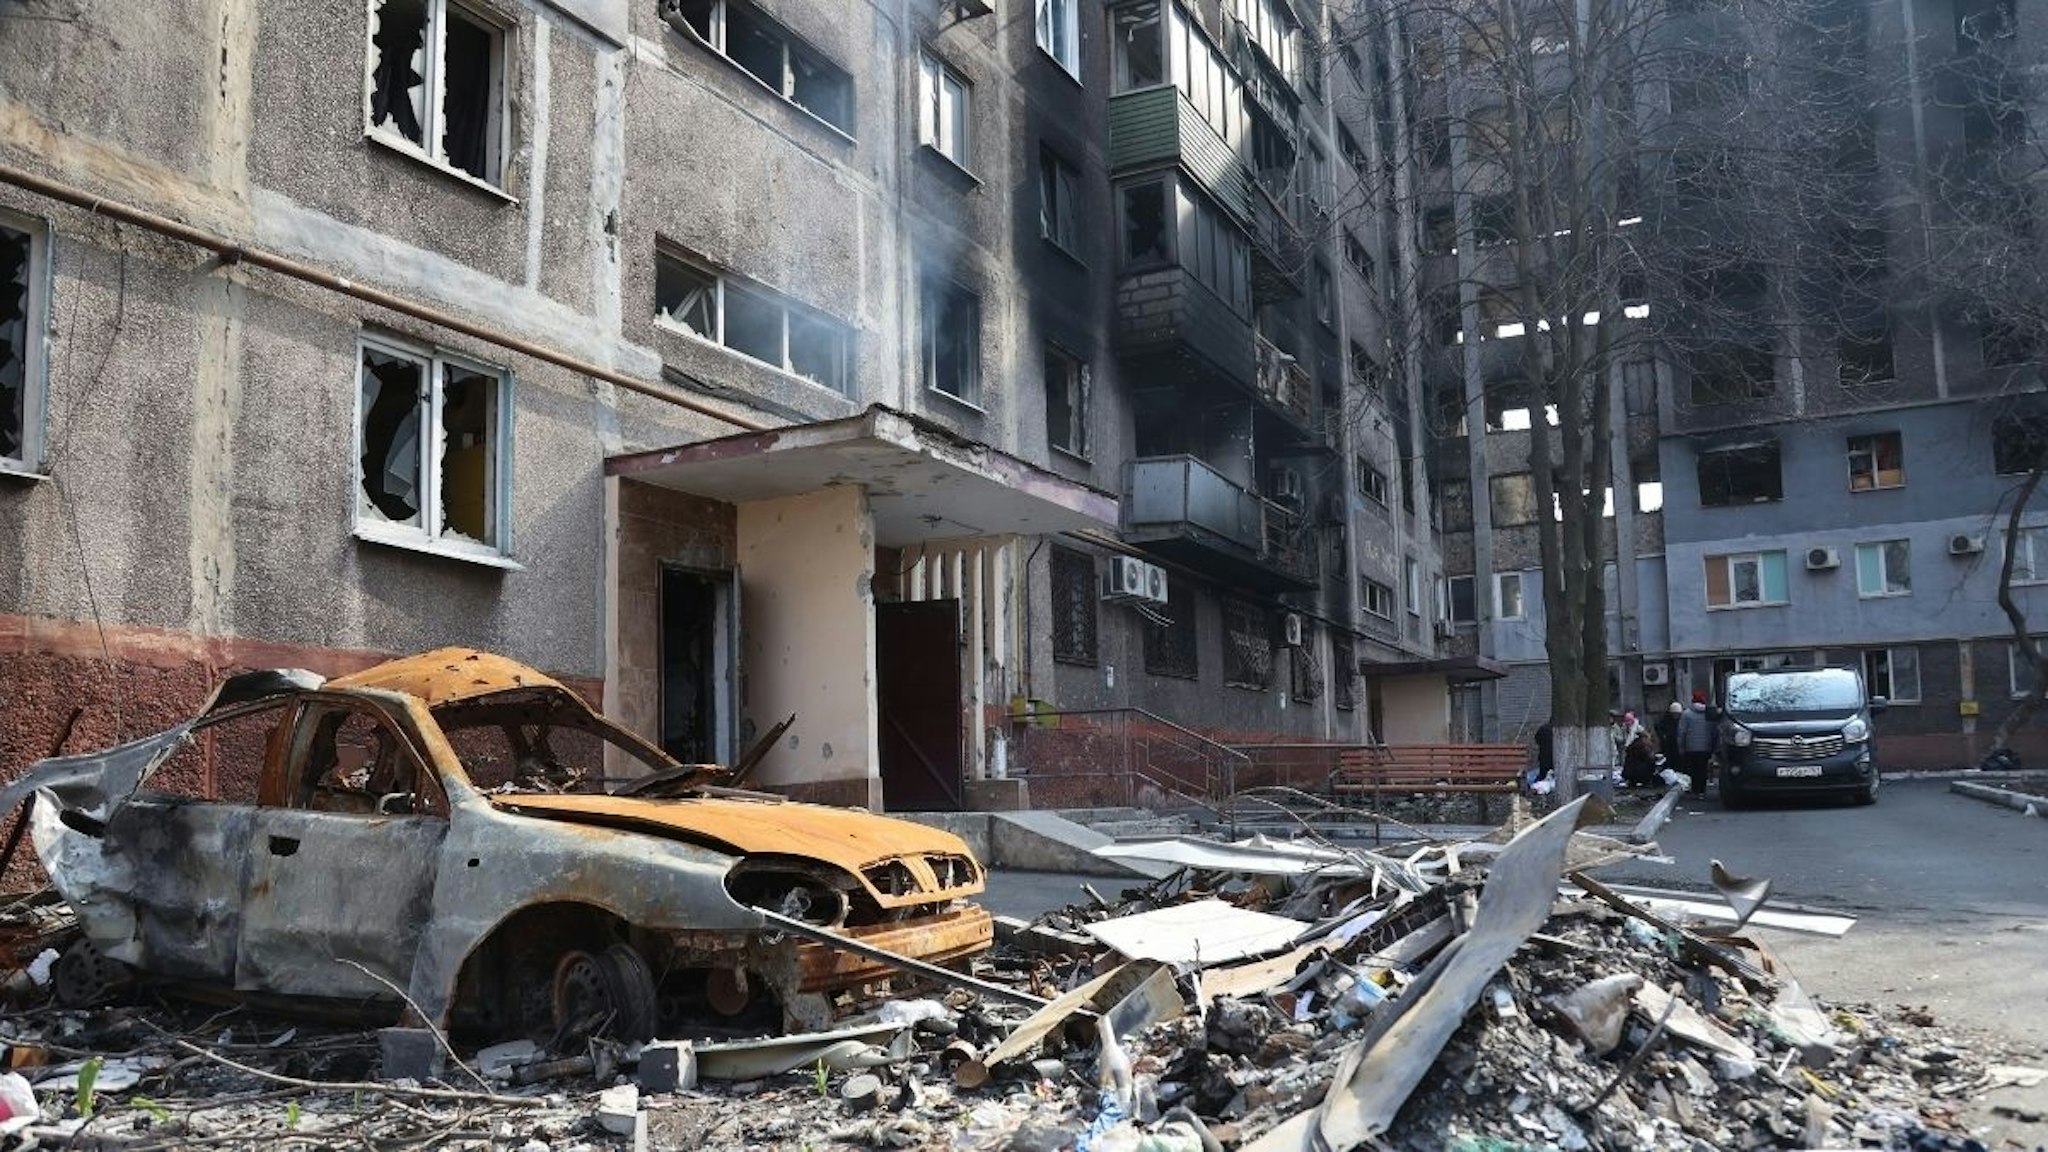 A view of destroyed buildings and a vehicle during ongoing conflicts in the city of Mariupol under the control of the Russian military and pro-Russian separatists, on April 09, 2022.